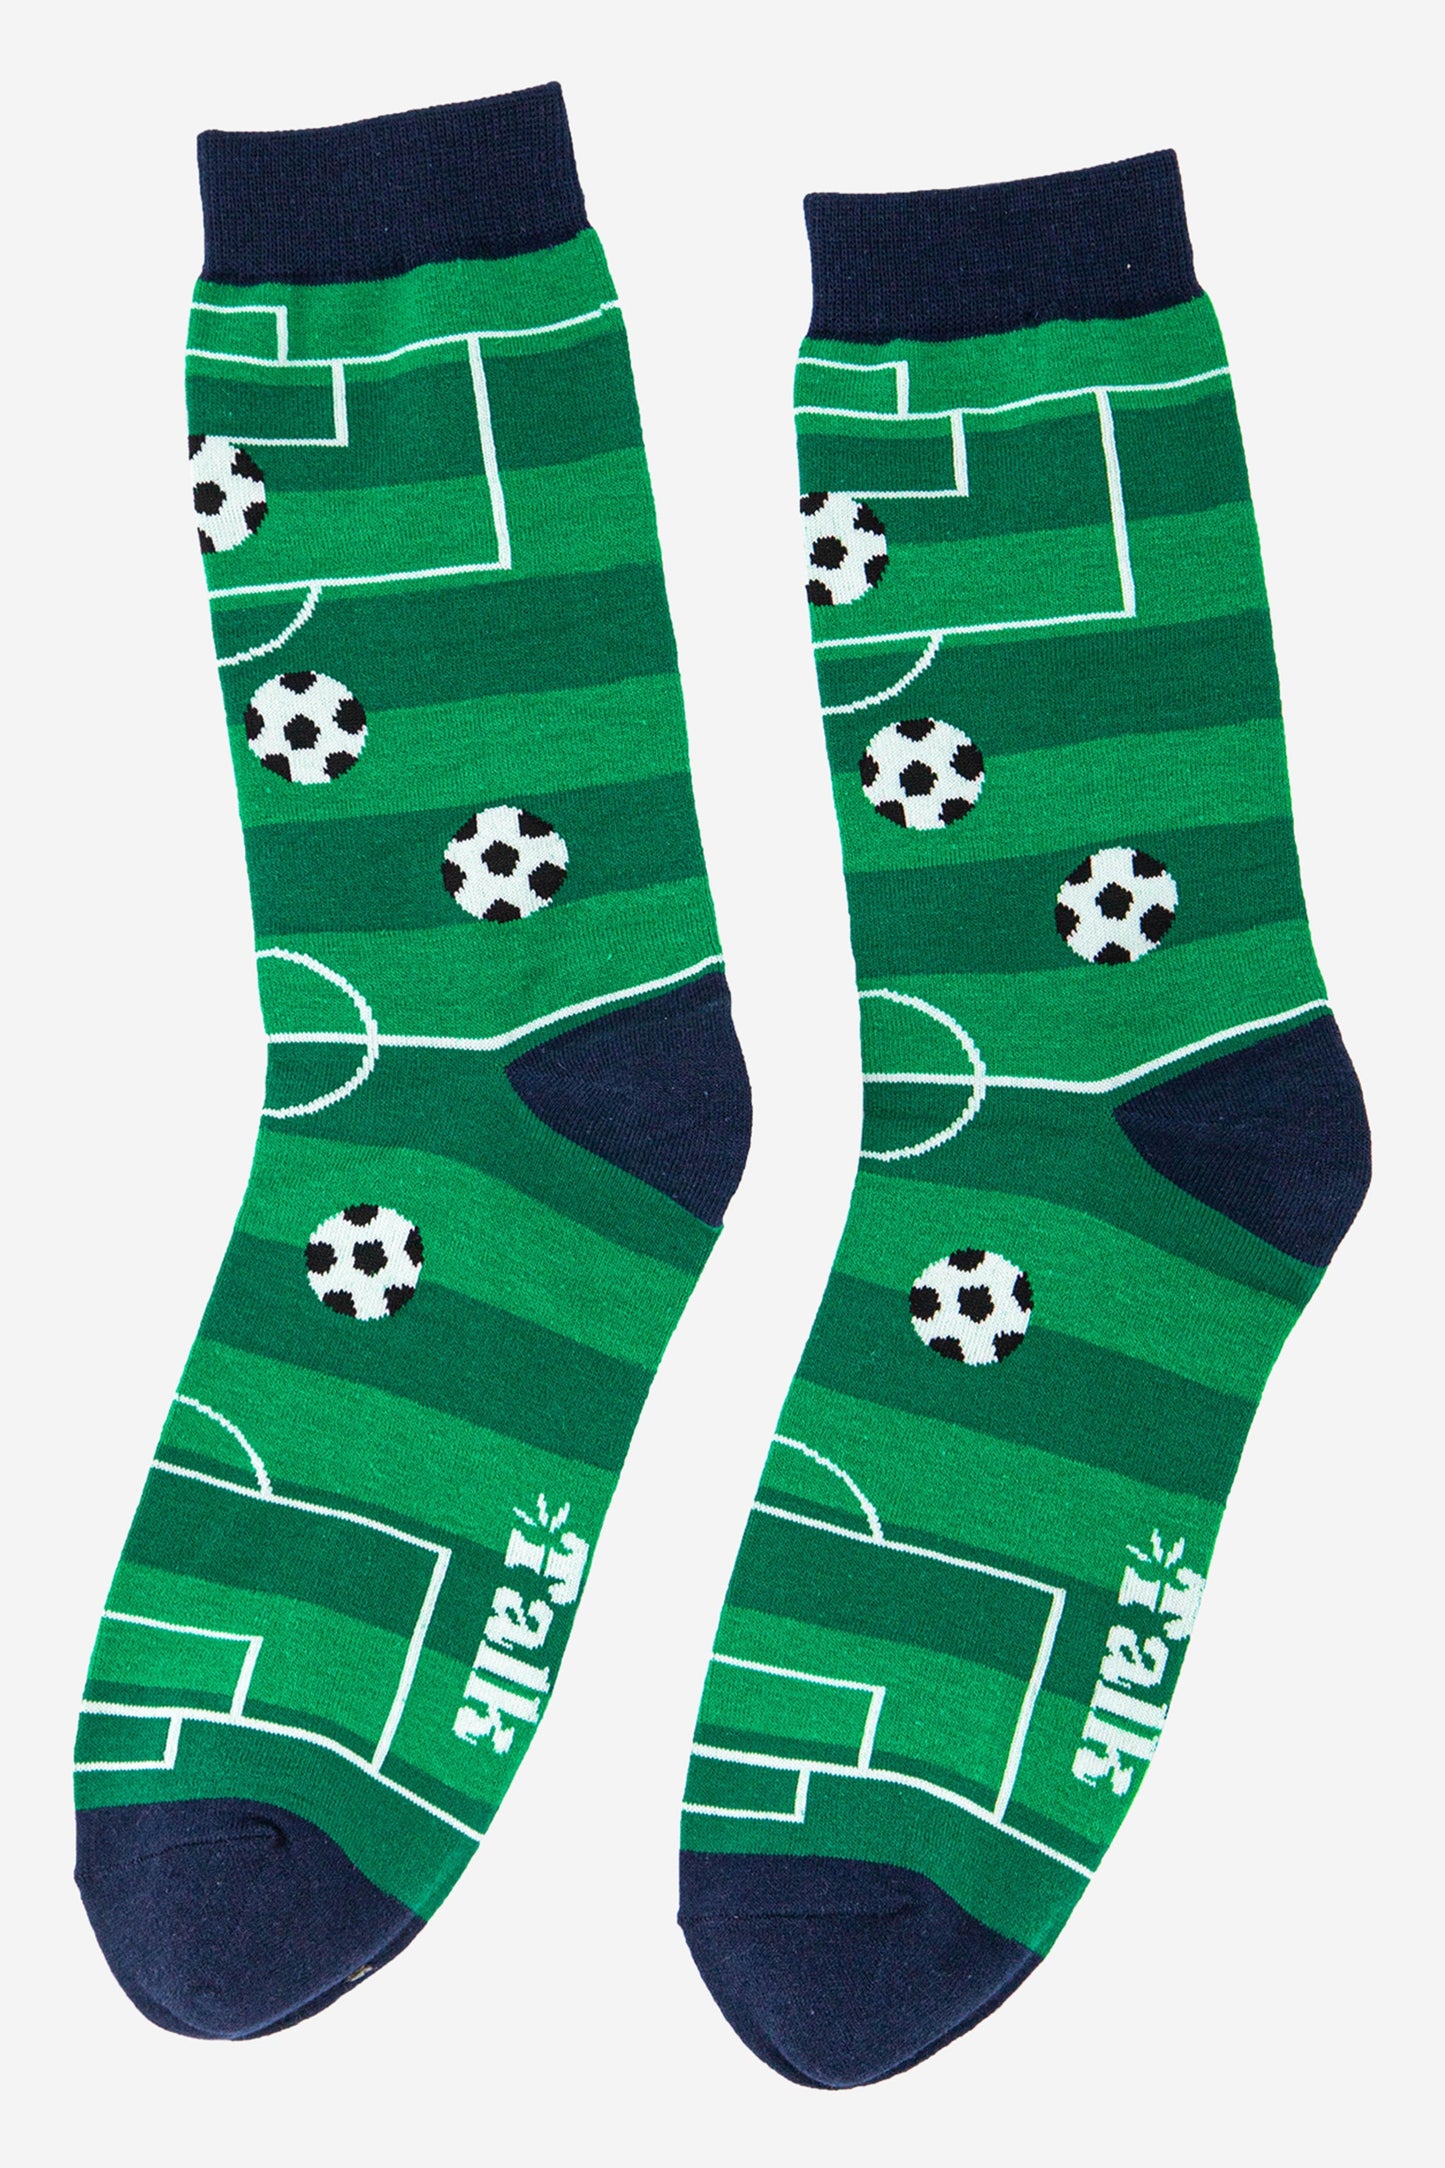 green and navy blue socks designed with white markings of a football pitch